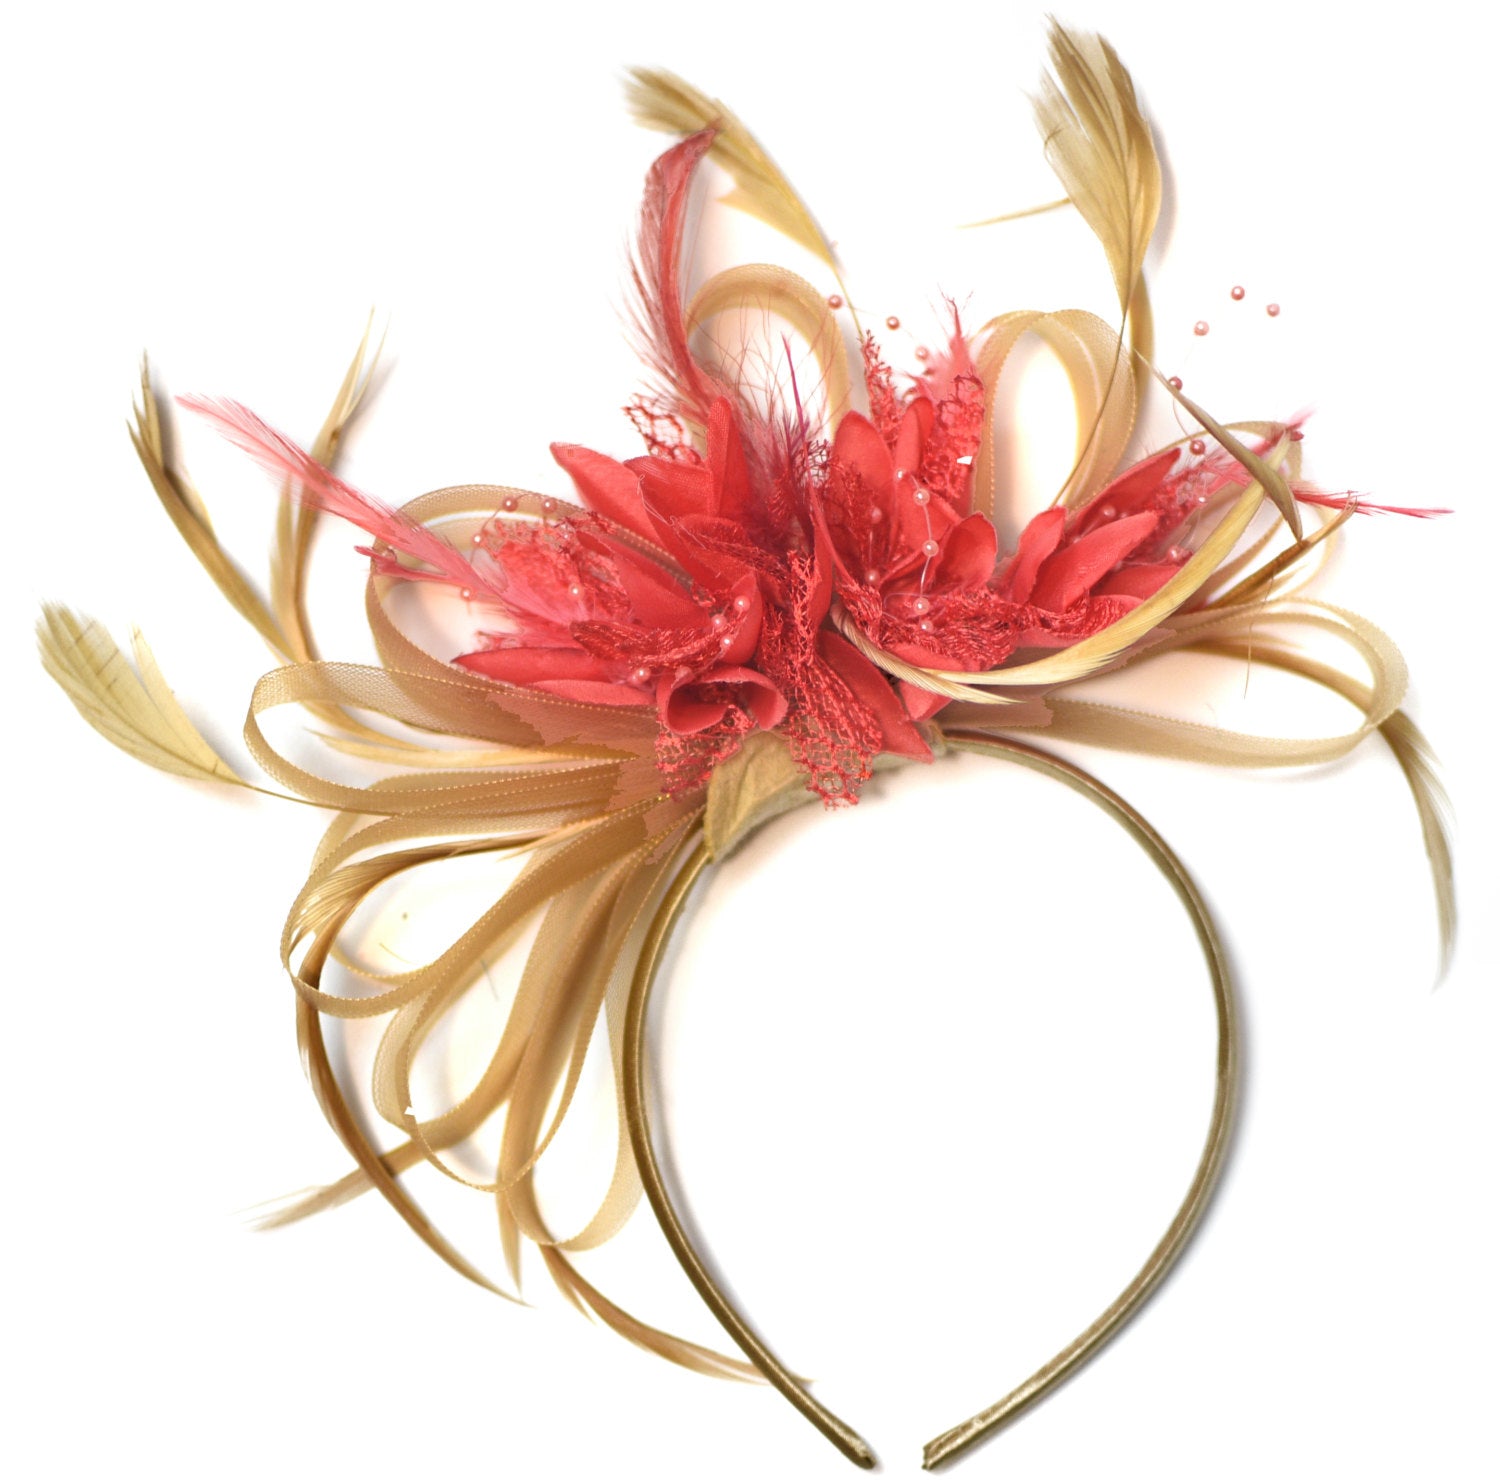 Caprilite Champagne Gold Beige Camel and Coral Pink Fascinator on Headband Alice Band UK Wedding Ascot Races Derby